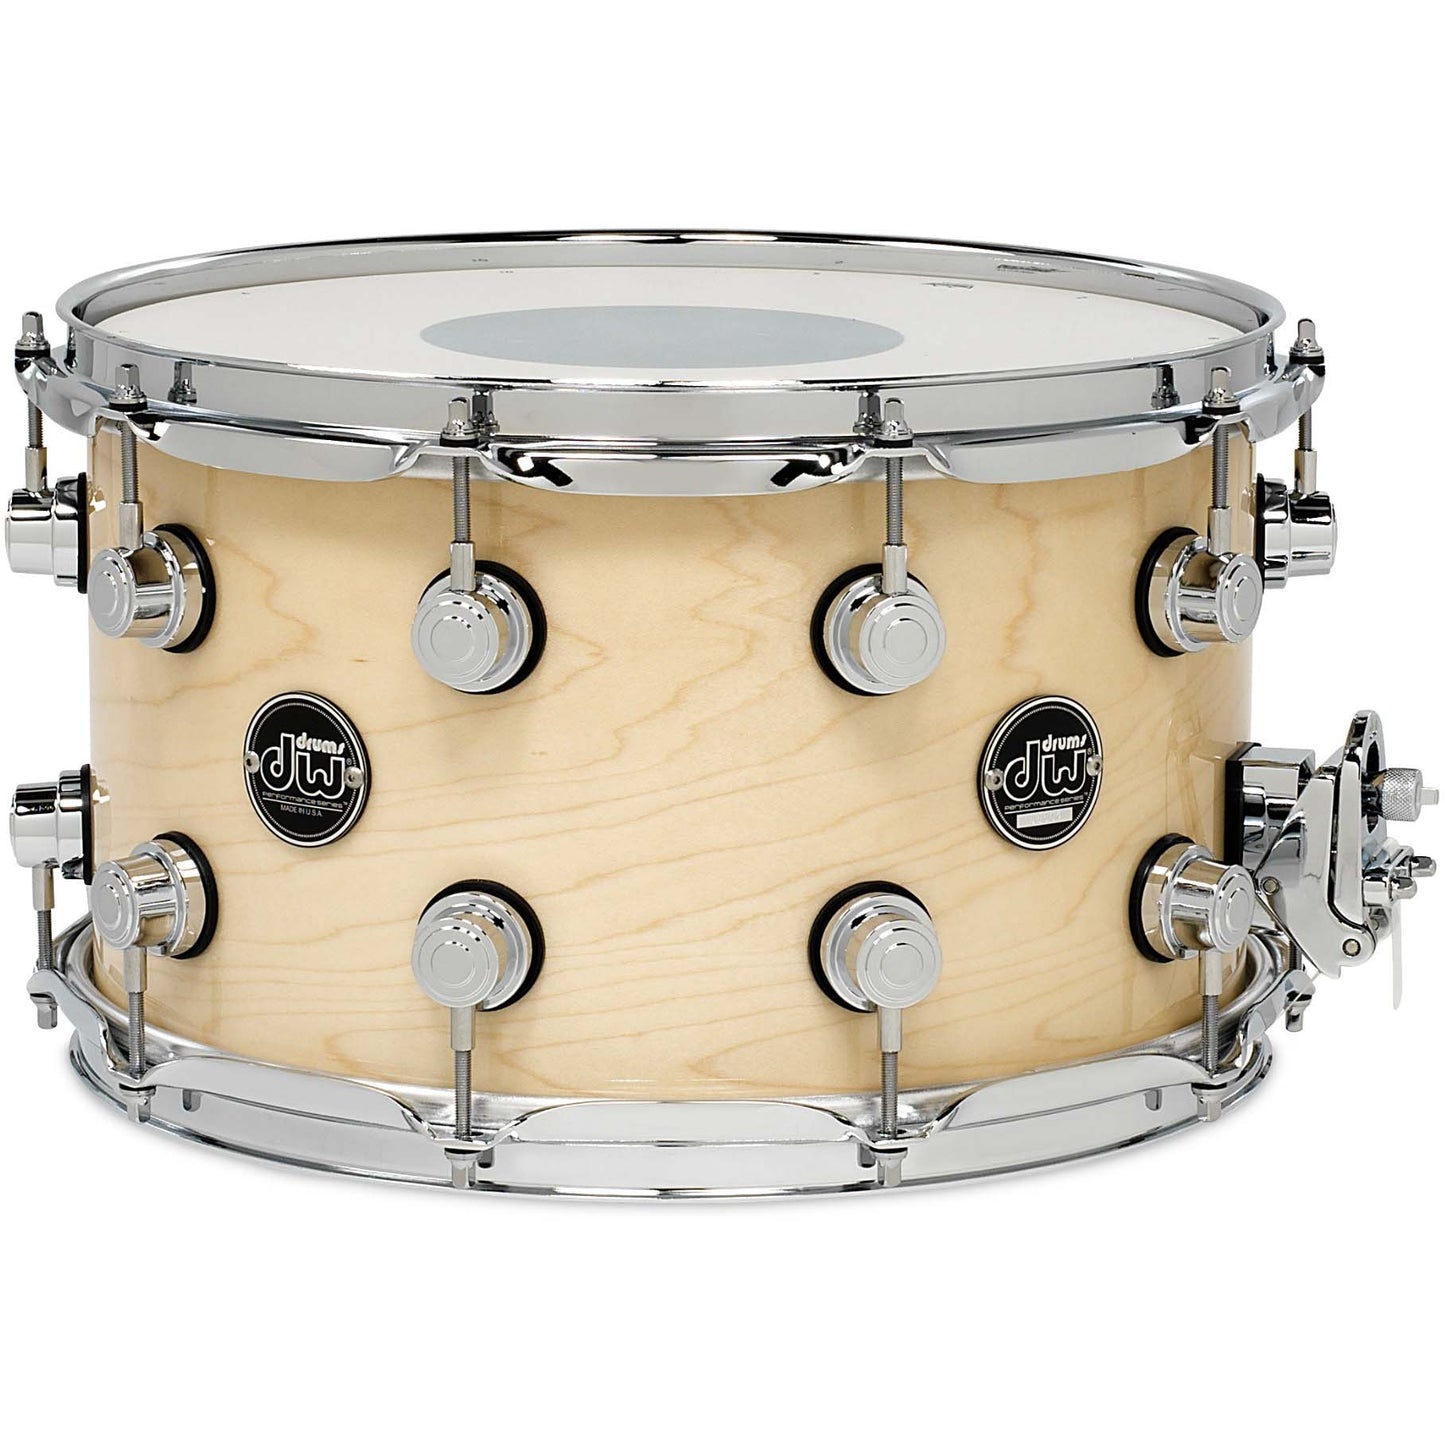 Drum Workshop Performance Series 8x14 Snare - Ebony Stain